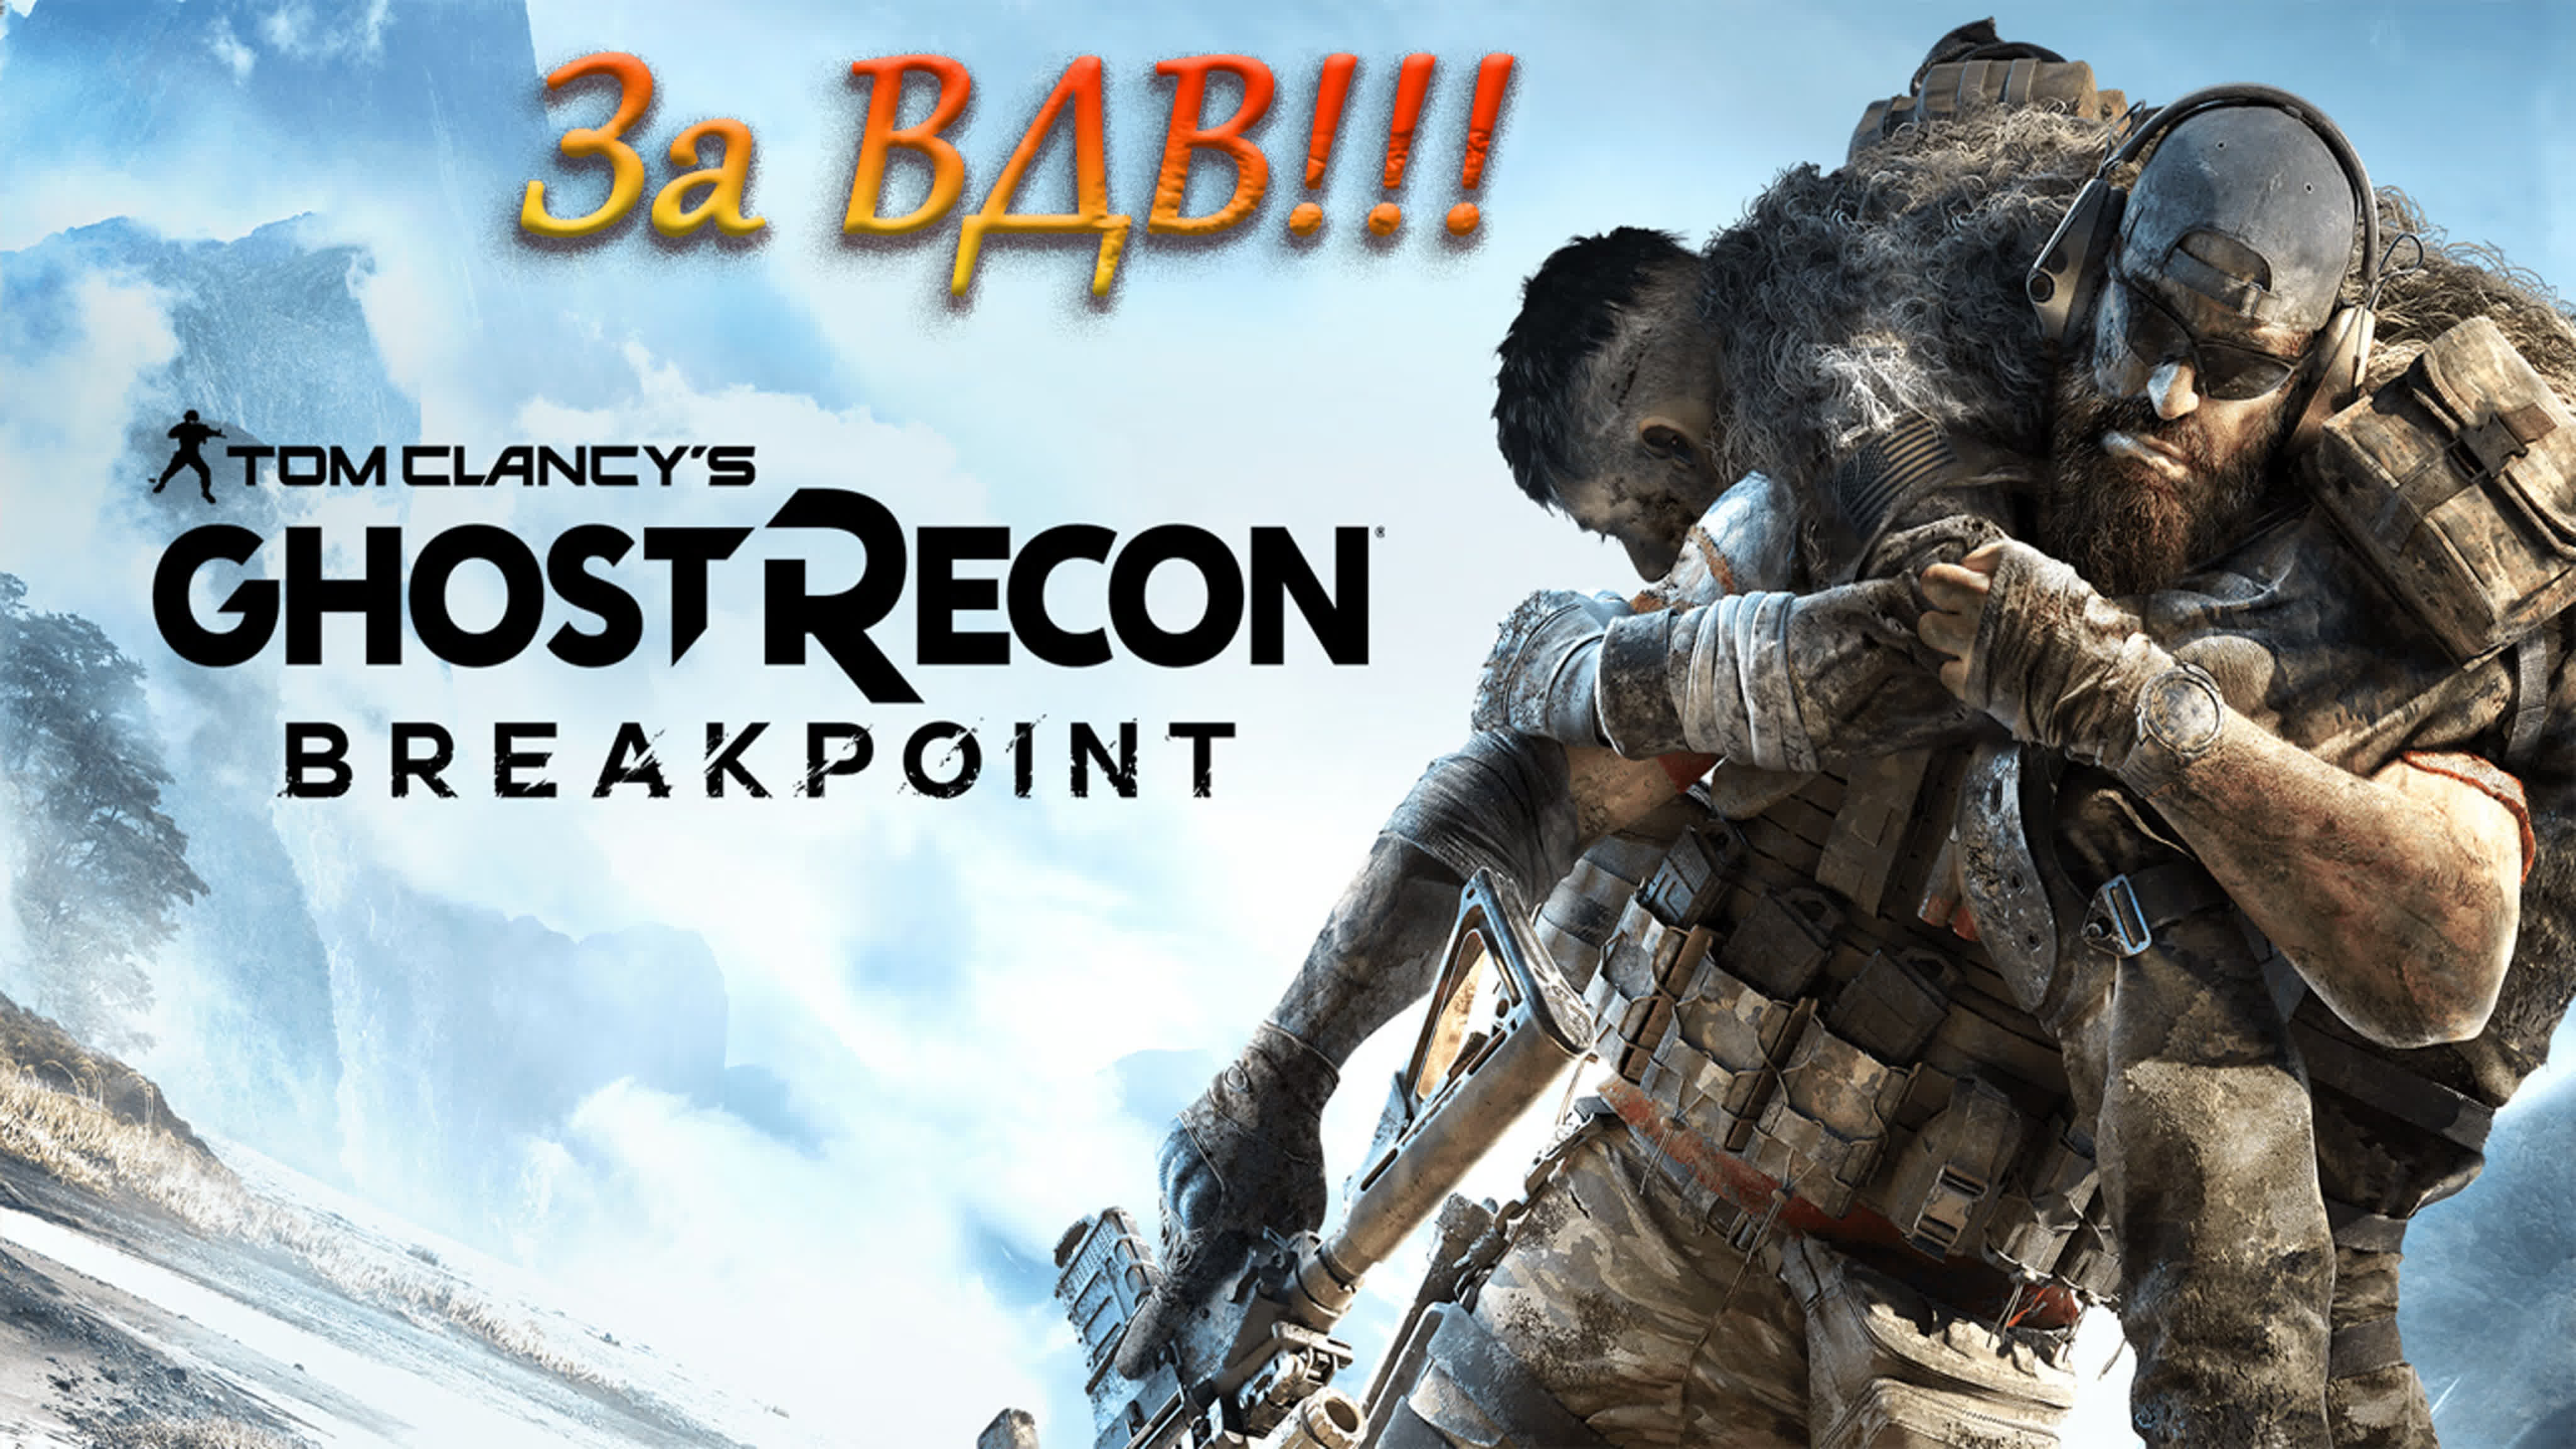 Overlord 3 1 ghost recon breakpoint. Tom Clancy's Ghost Recon Wildlands ВДВ. Tom Clancy's Ghost Recon: breakpoint. Tom Clancys Ghost Recon breakpoint (Xbox one) диск. Tom Clancy's Ghost Recon breakpoint, а Wildlands.